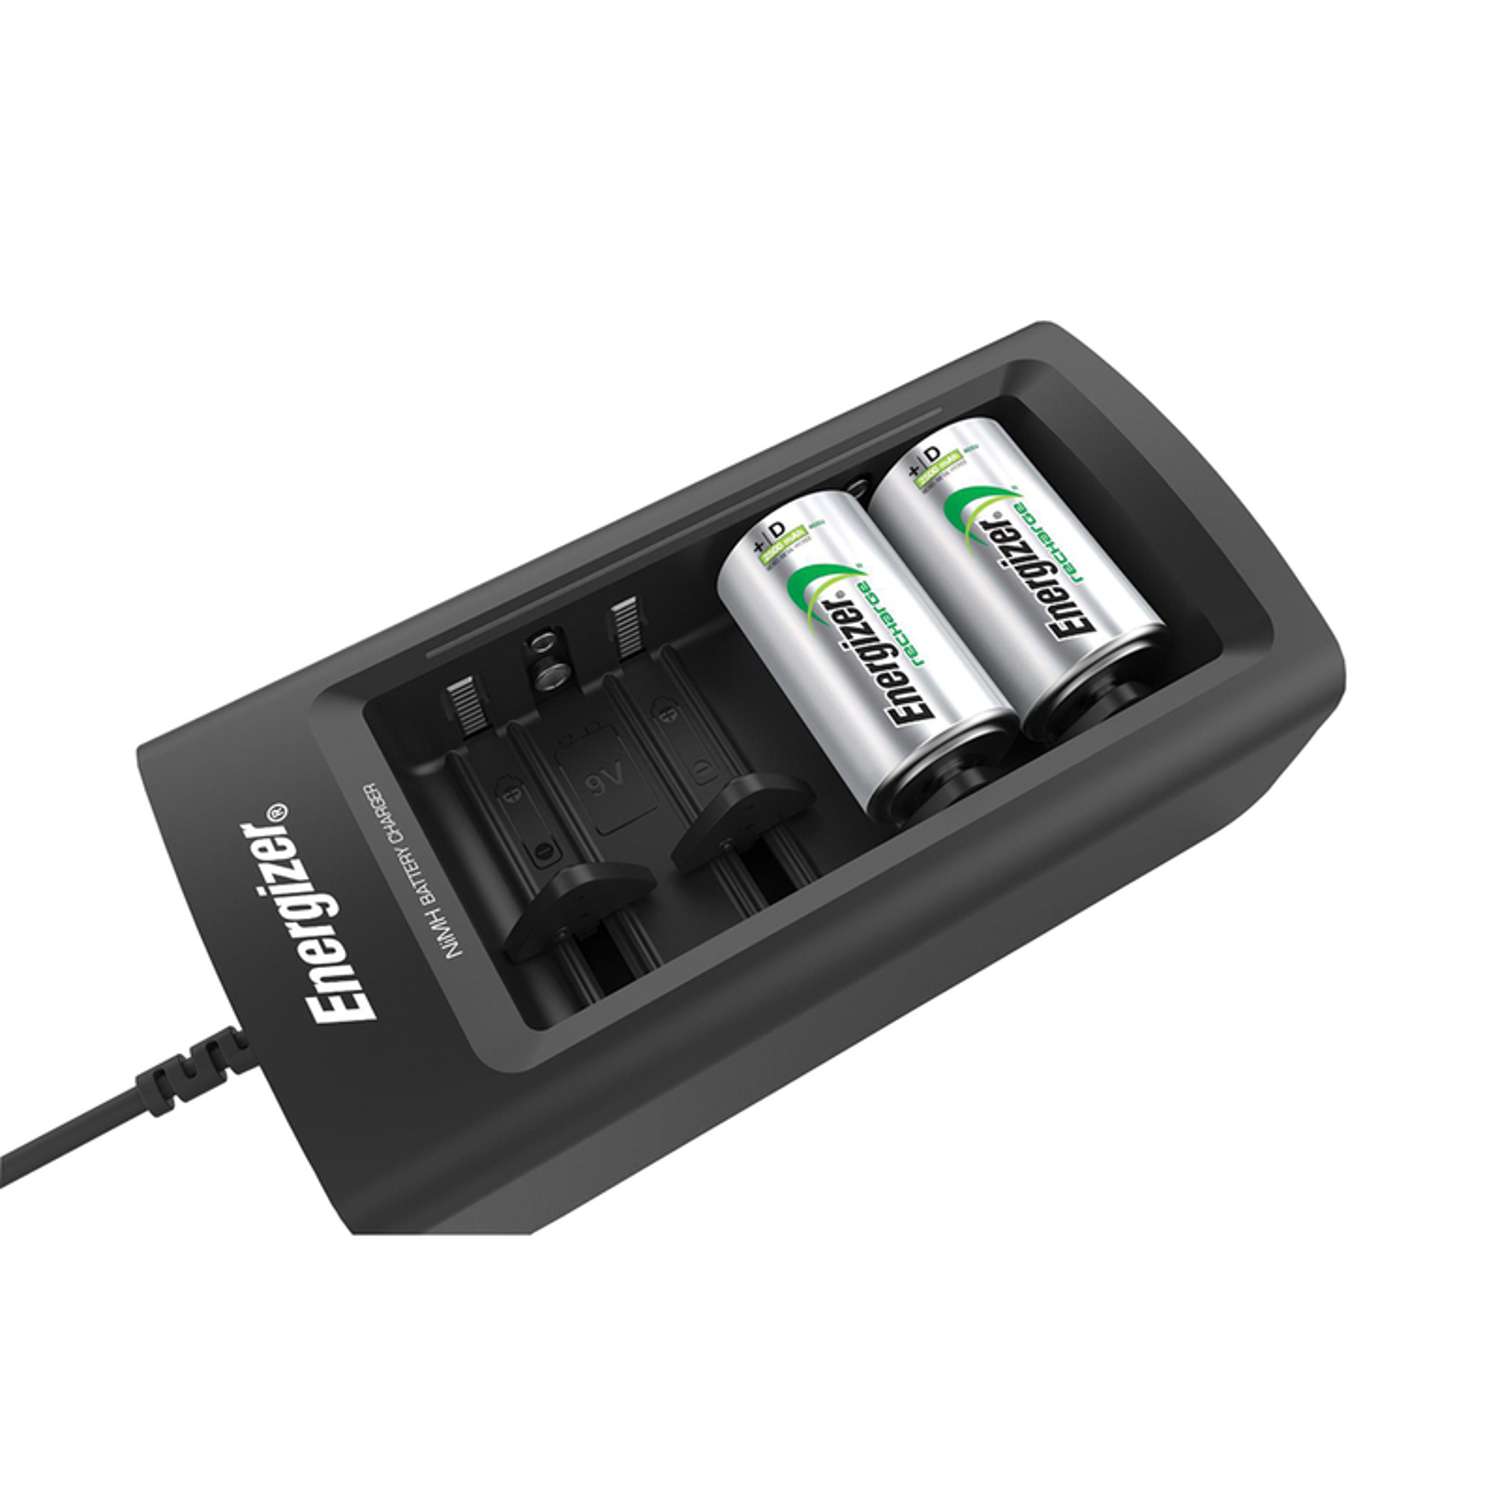 Energizer Recharge 4 Battery Black Universal Battery Charger - Ace Hardware